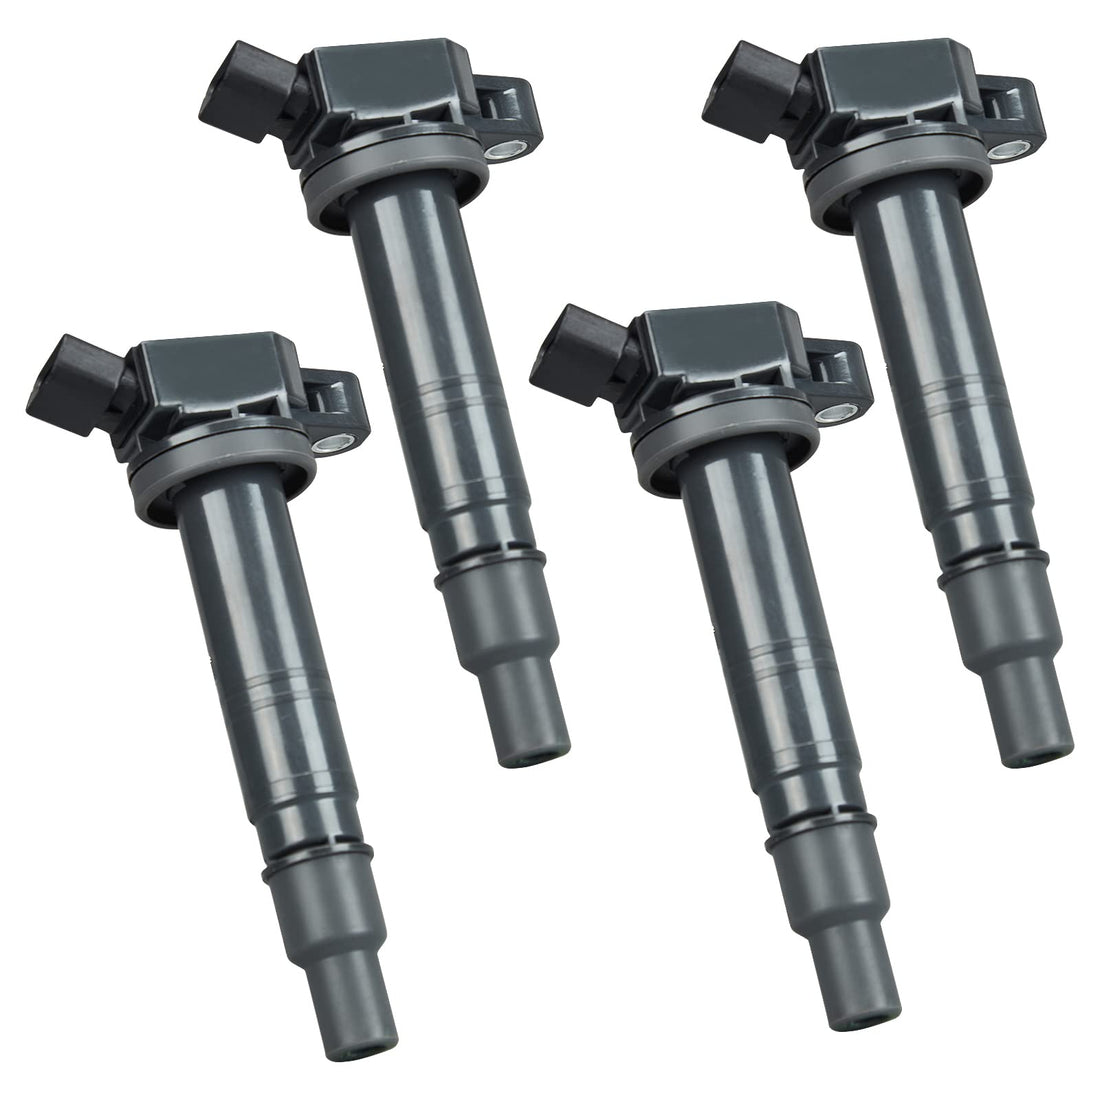 4-Pack Toyota & Scion Ignition Coils - German Copper, OEM Fit